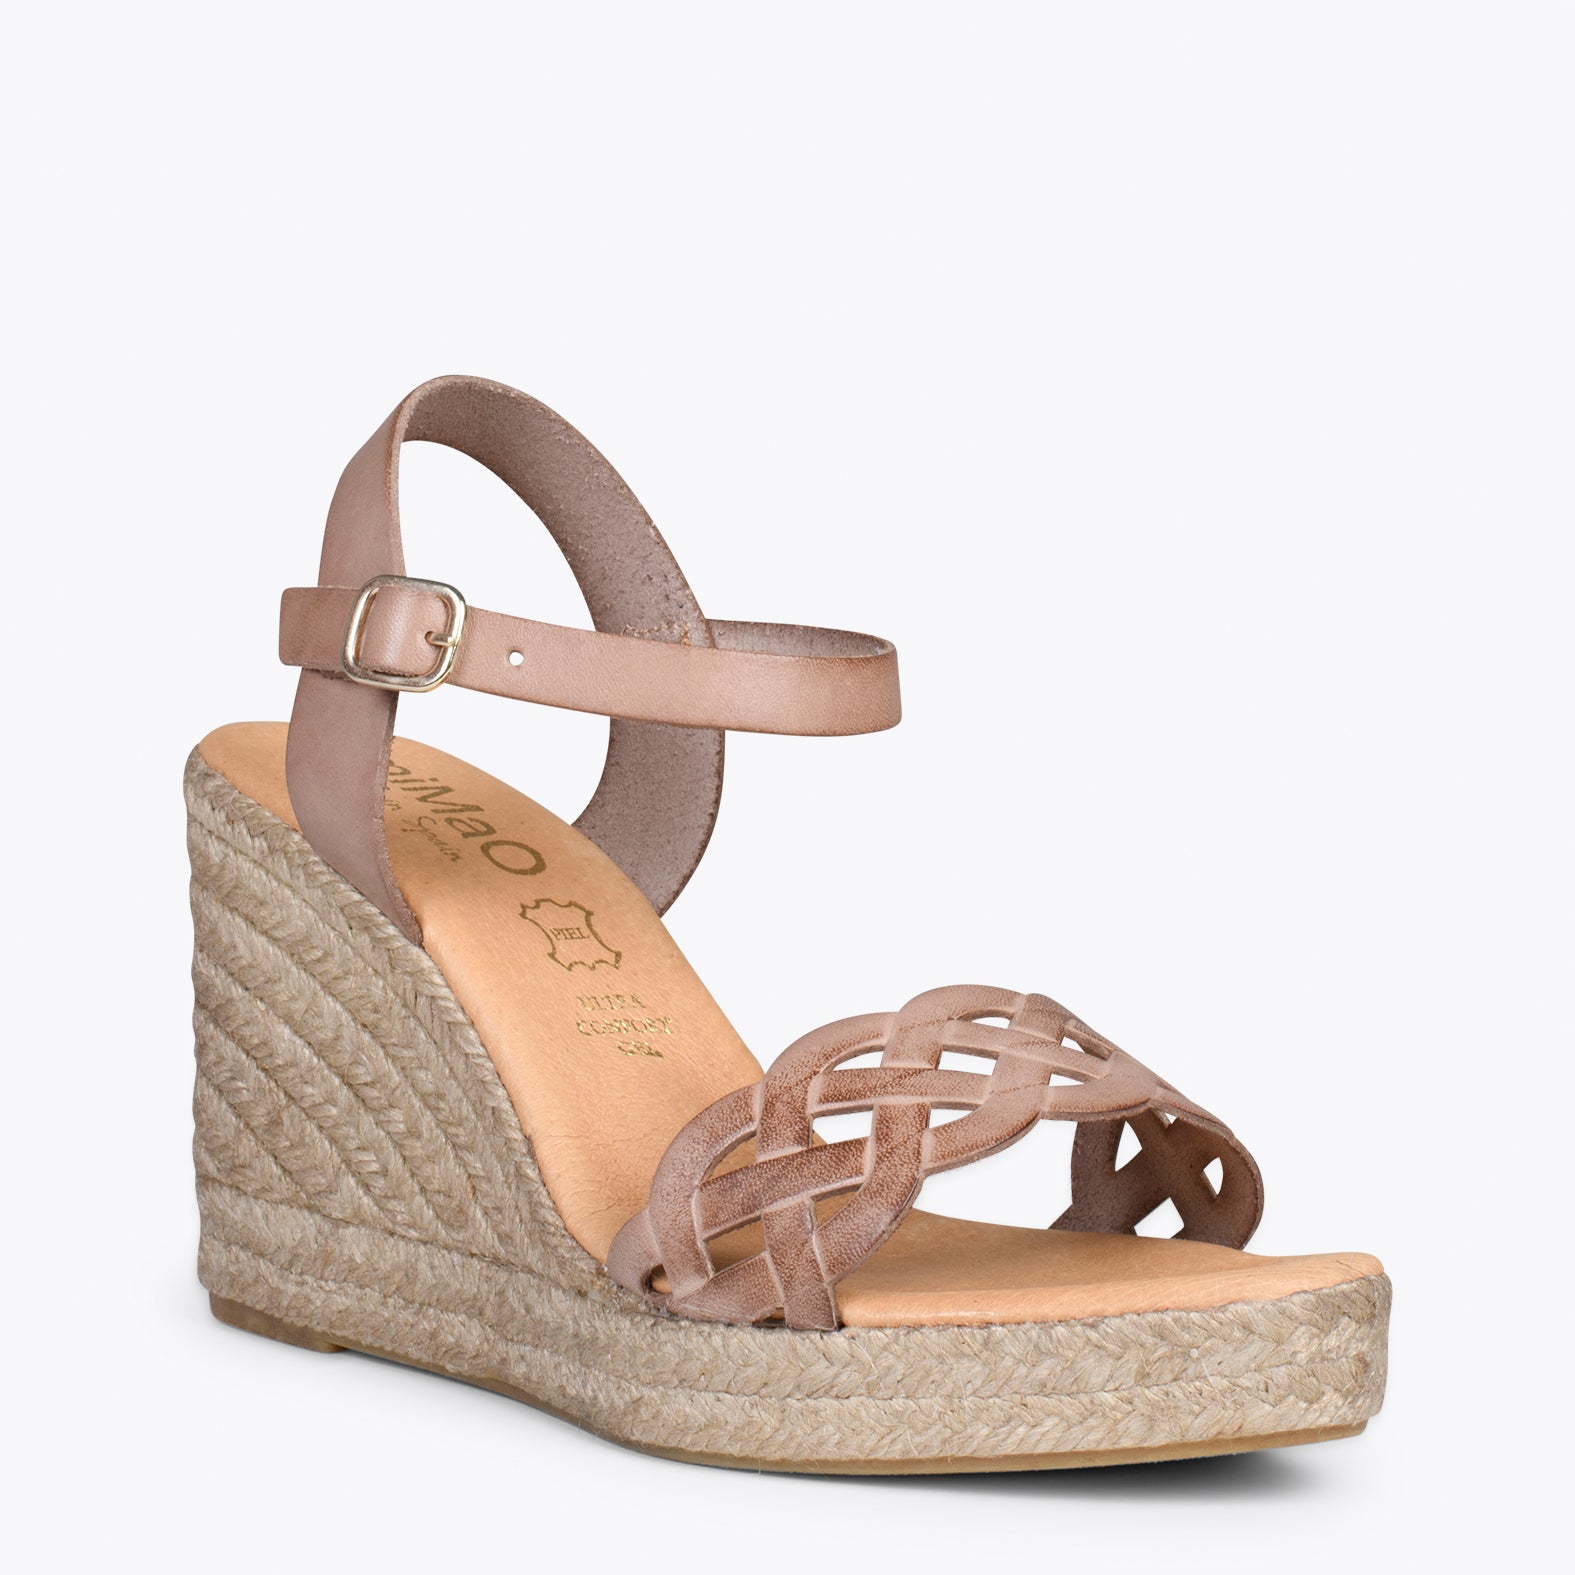 OASIS – TAUPE espadrille wedges with braided front